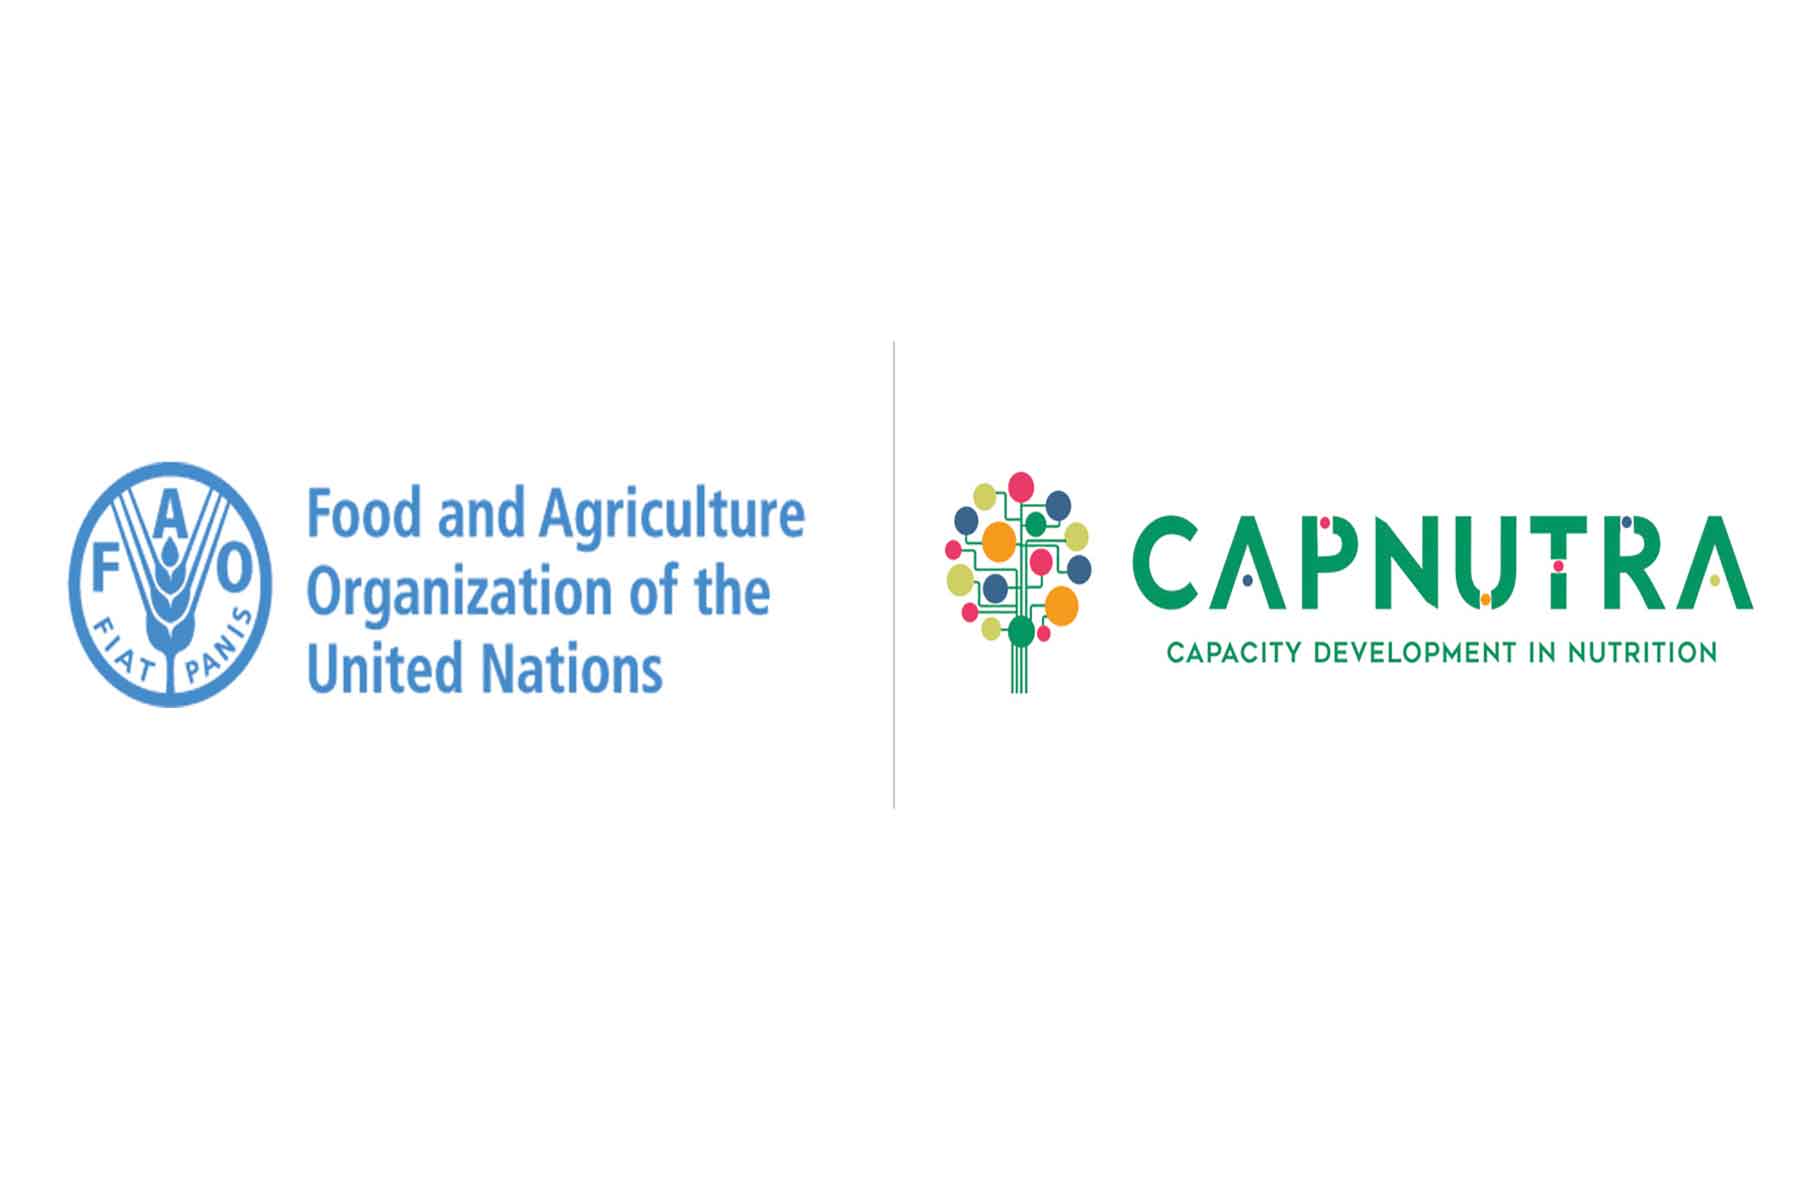 FAO Regional Technical Cooperation Programme (TCP)
Enhancing analytical evidence on diet and nutrition challenges from food systems perspectives in response to COVID-19 (TCP/RER/3805) (2021-2023)